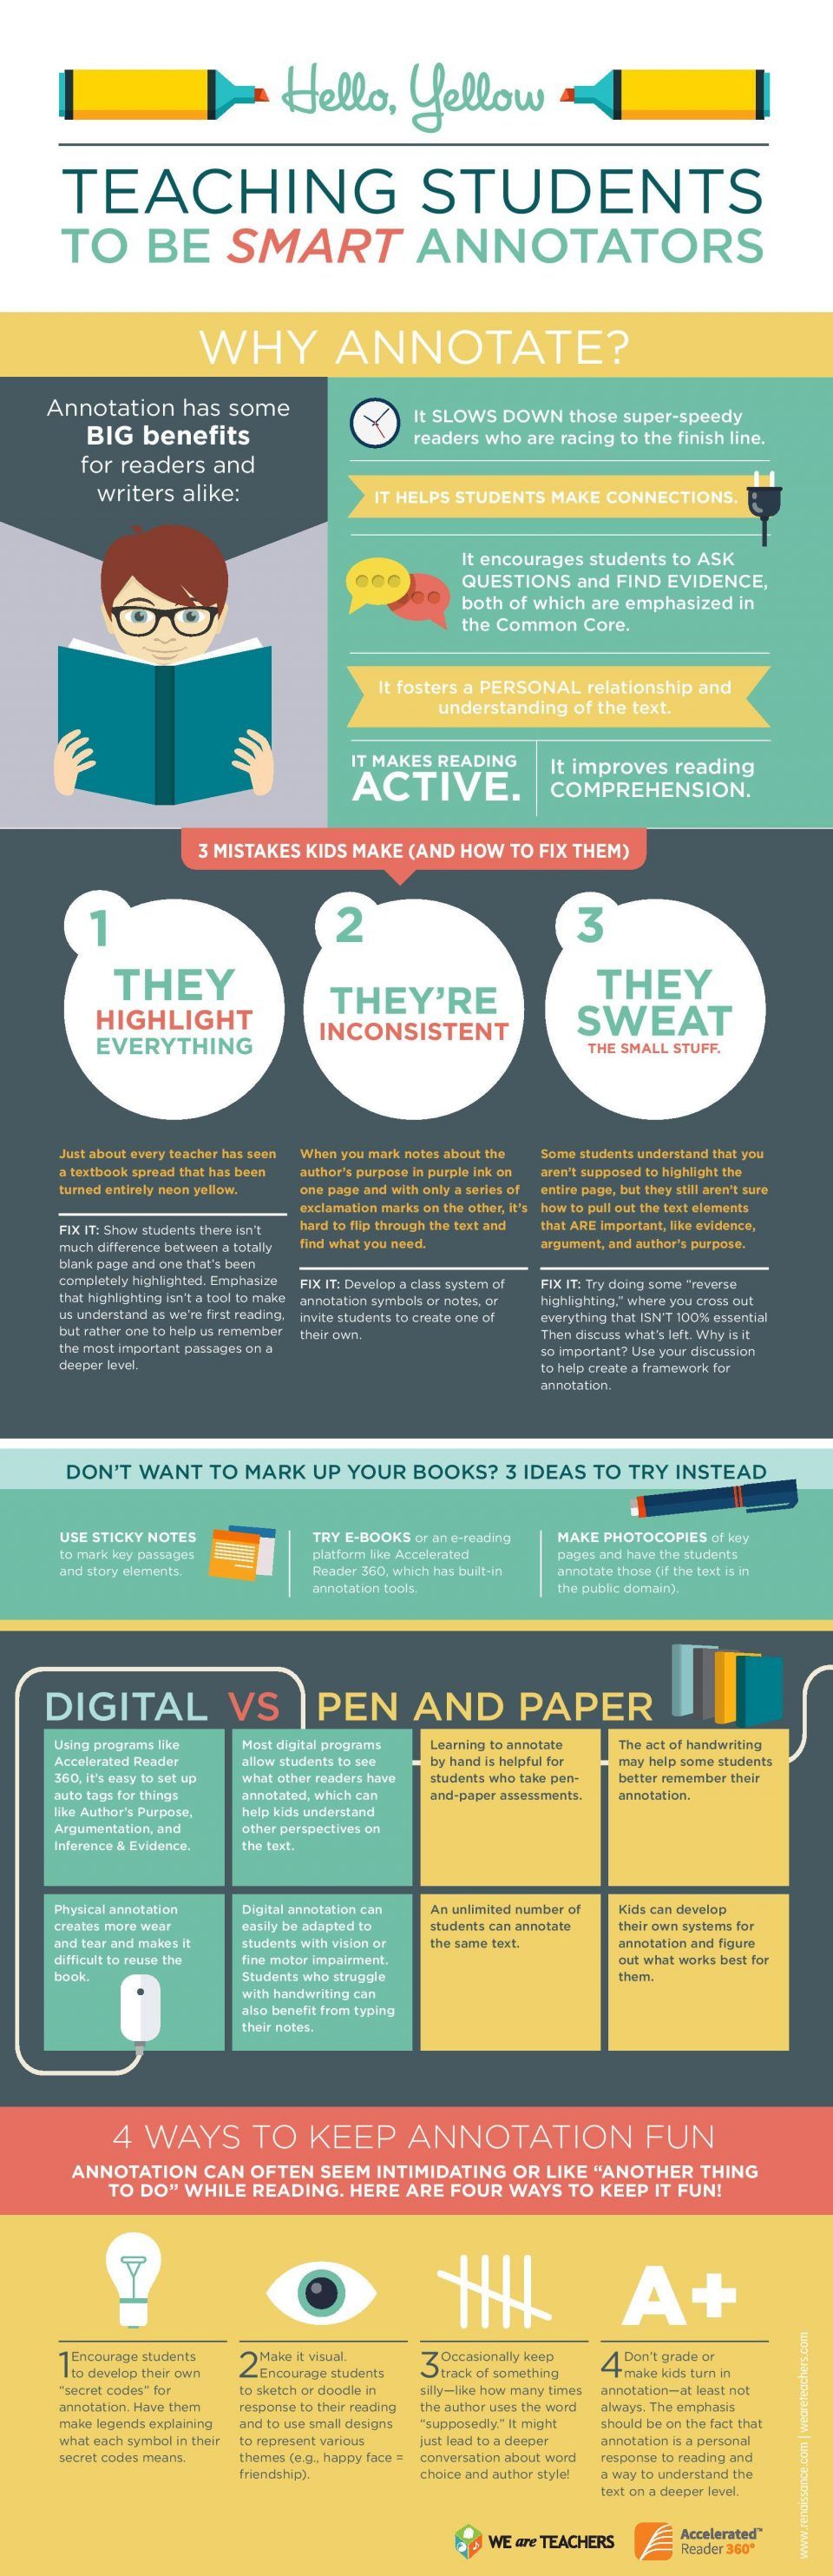 Teaching Students to Be Better Annotators Infographic